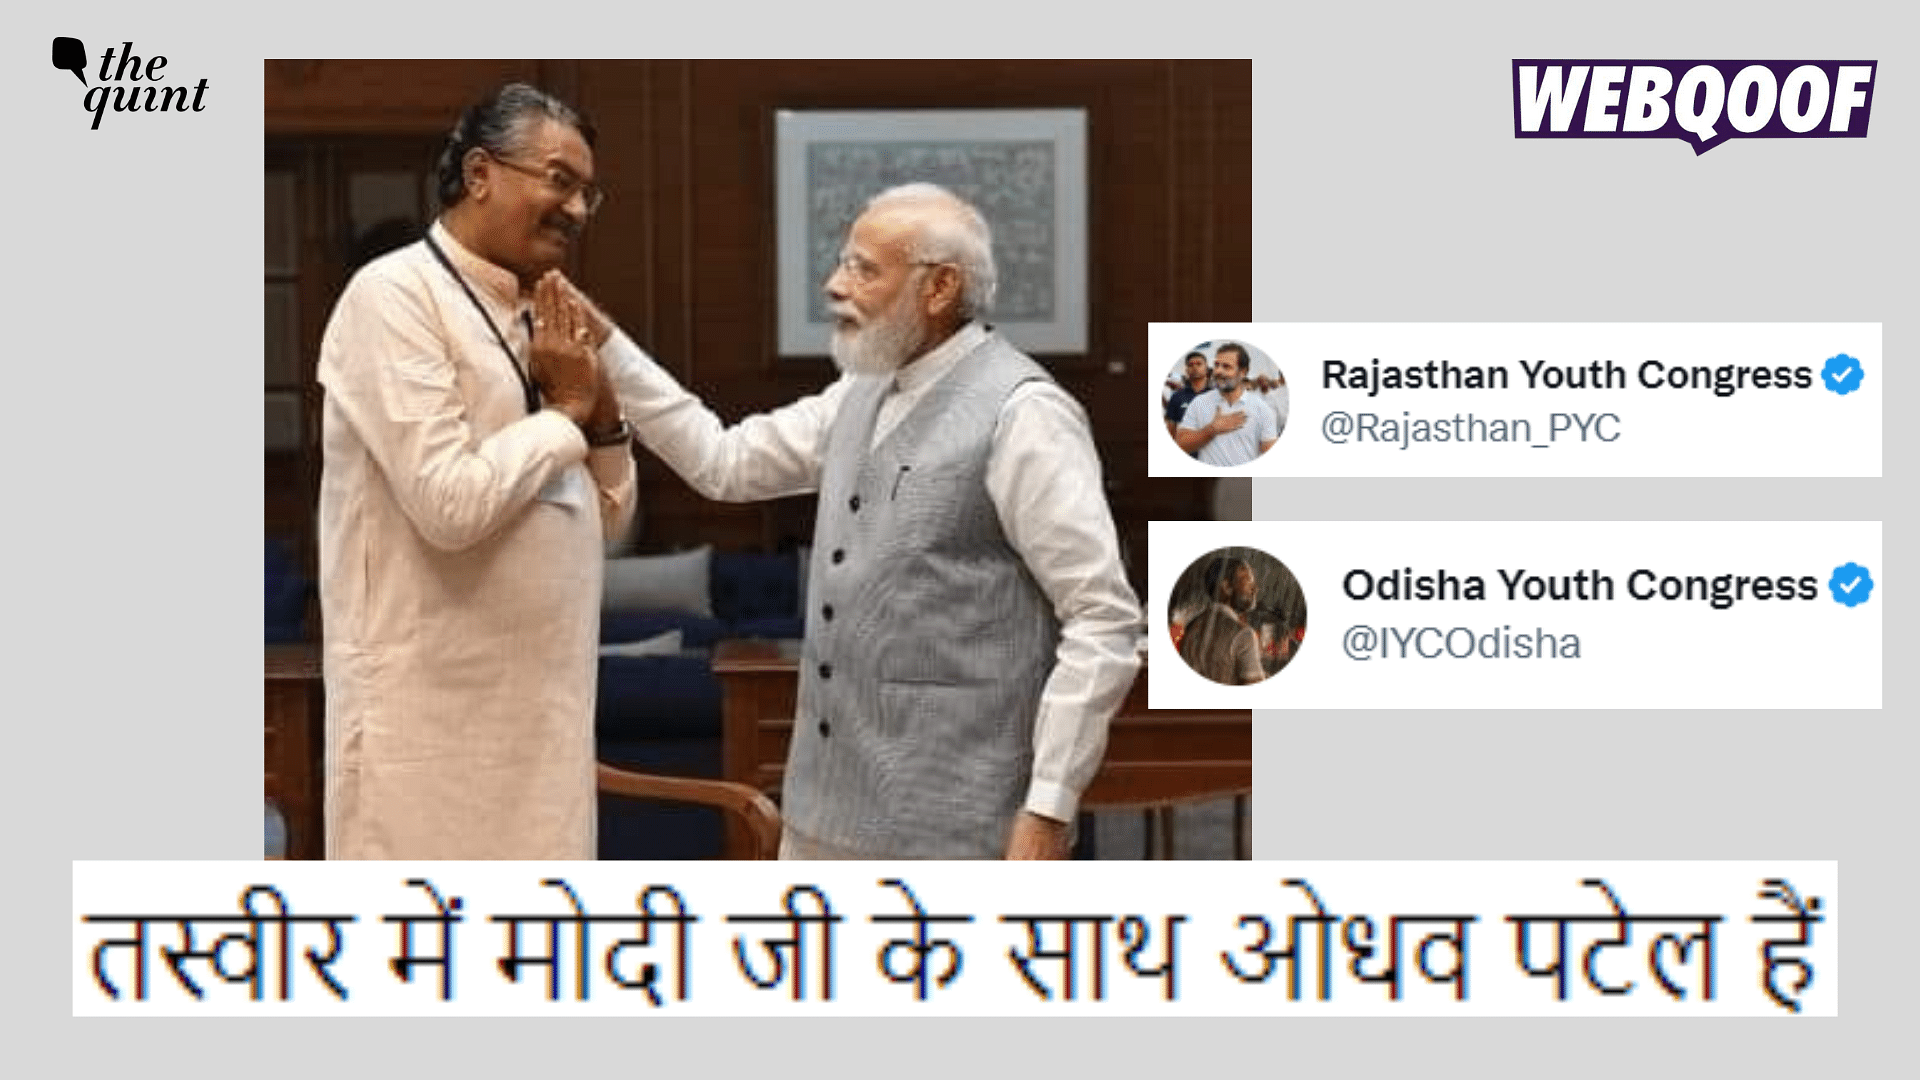 <div class="paragraphs"><p>Fact-check: The claim states that the image shows Prime Minister Narendra Modi with the owner of Oreva Group, which was responsible for the repair of the Morbi bridge.&nbsp;</p></div>